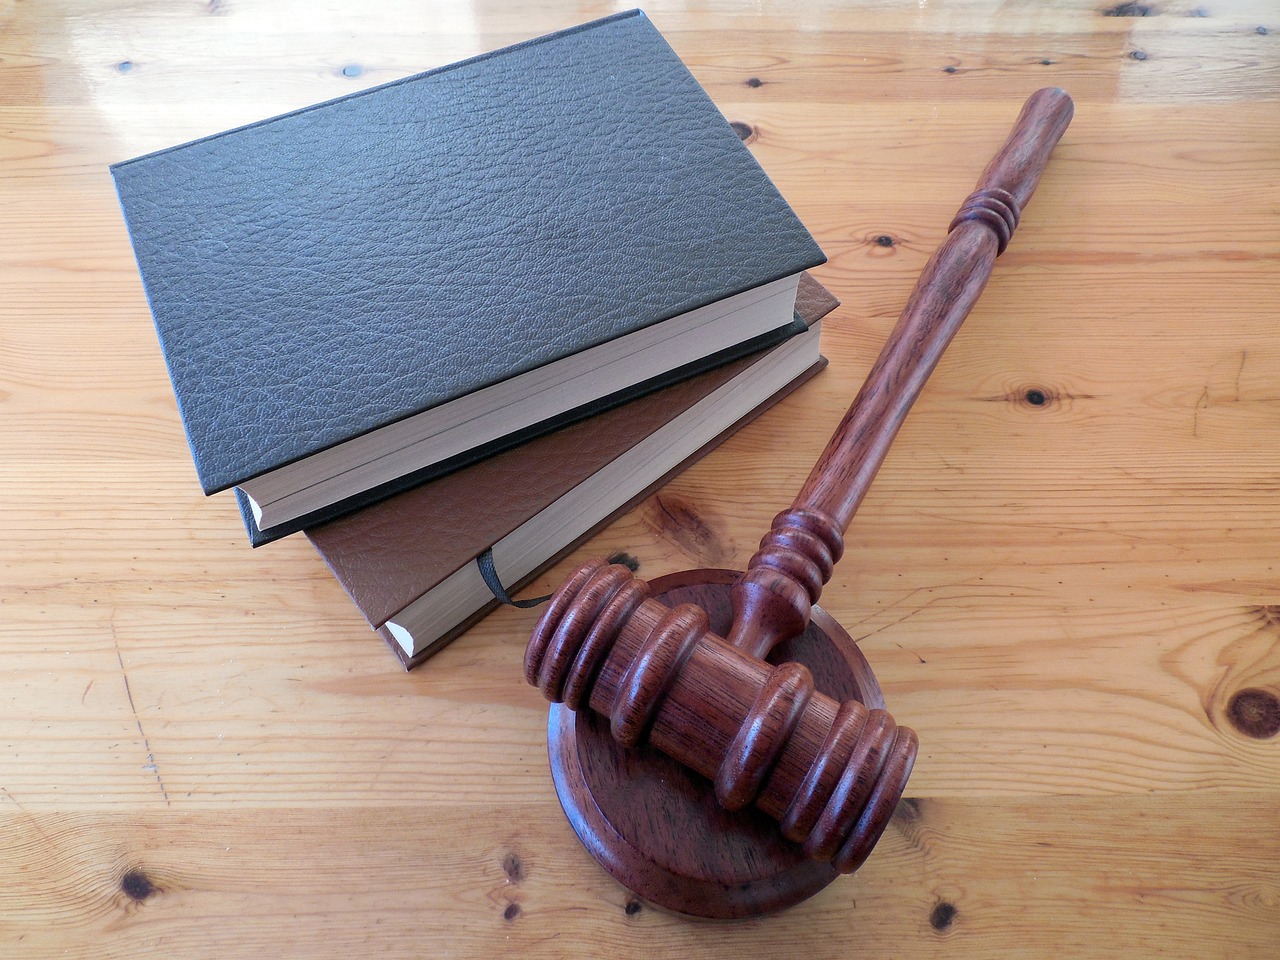 5 content marketing tips for law firms